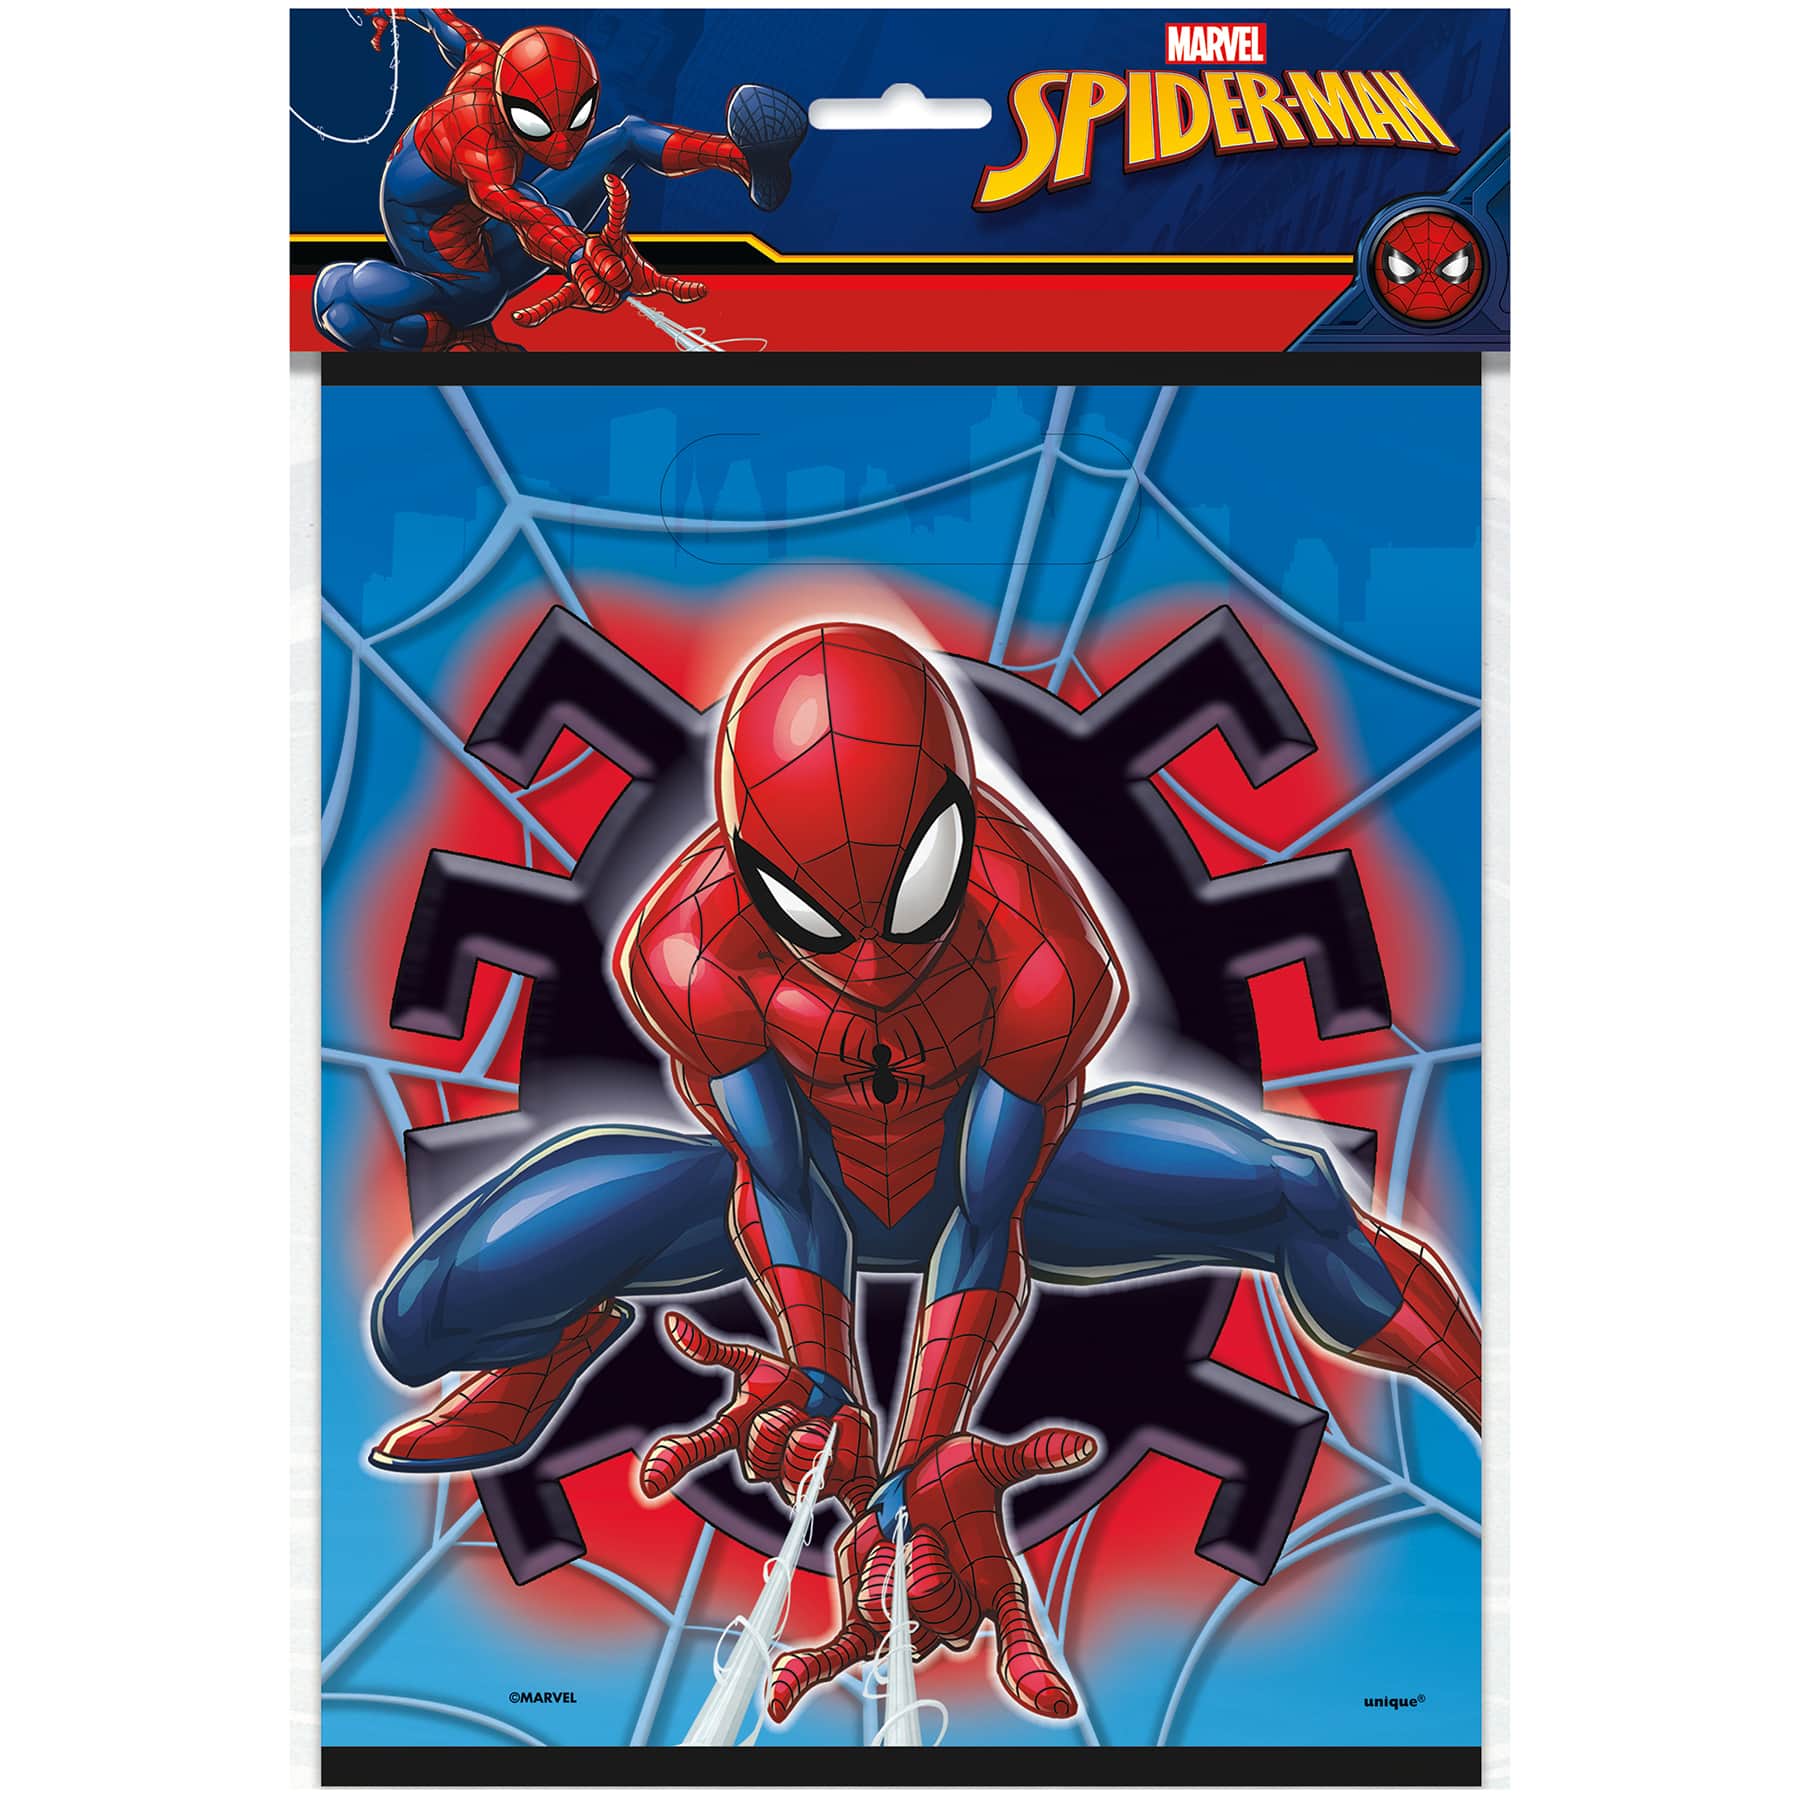 Spider-Man Stickers x 5 Spiderman Birthday Party Favours Loot Bags Ideas Fun 